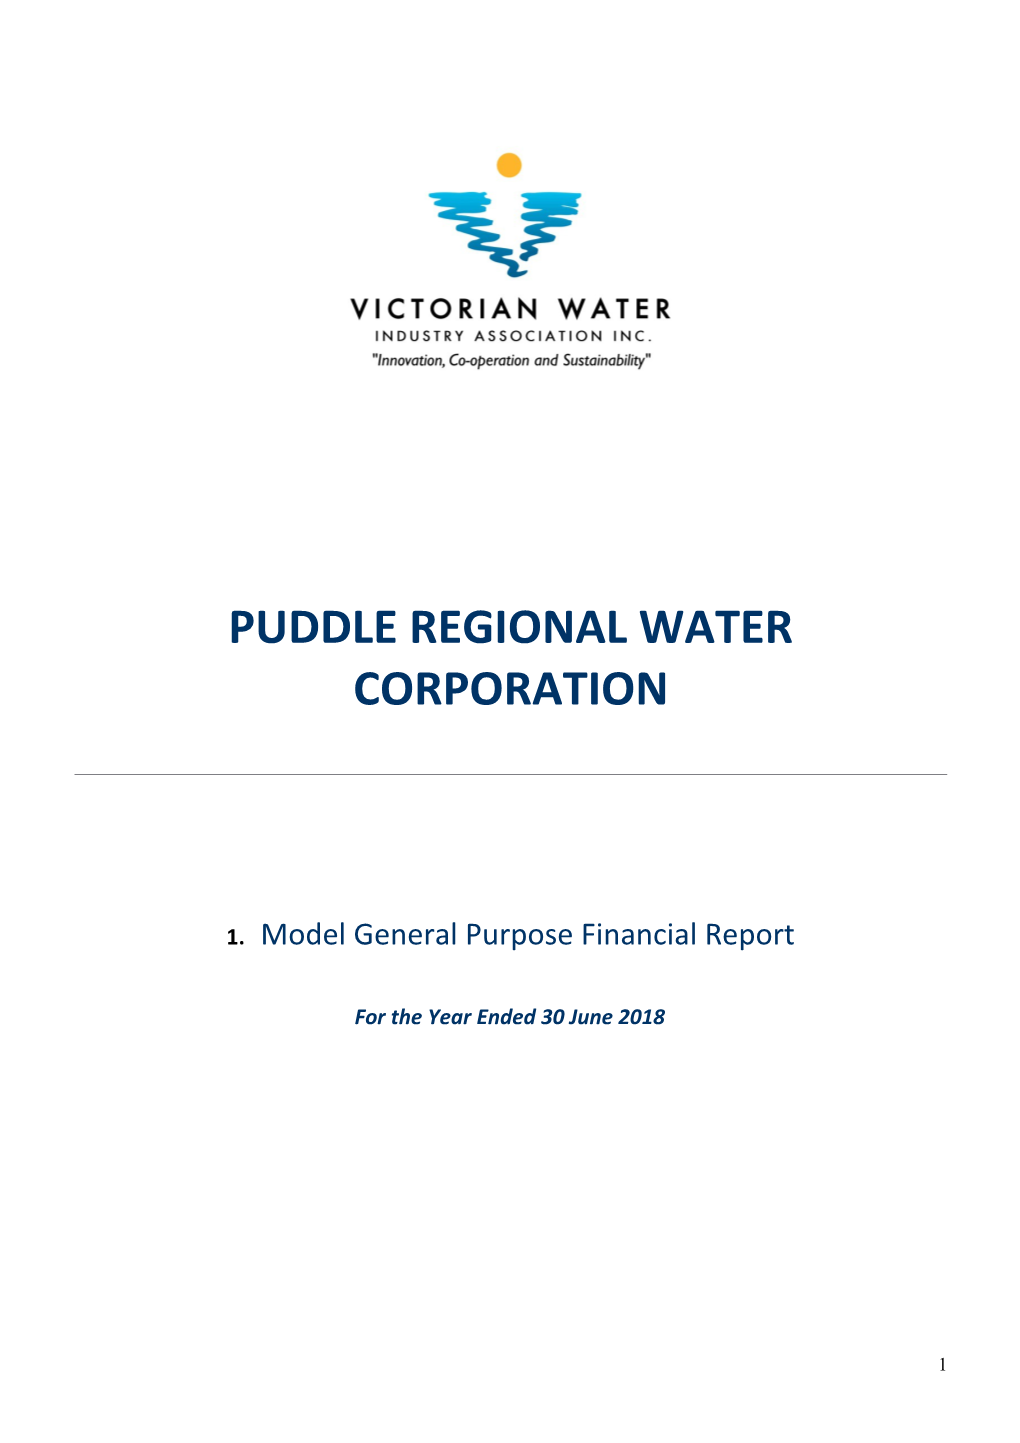 Puddle Regional Water Corporation